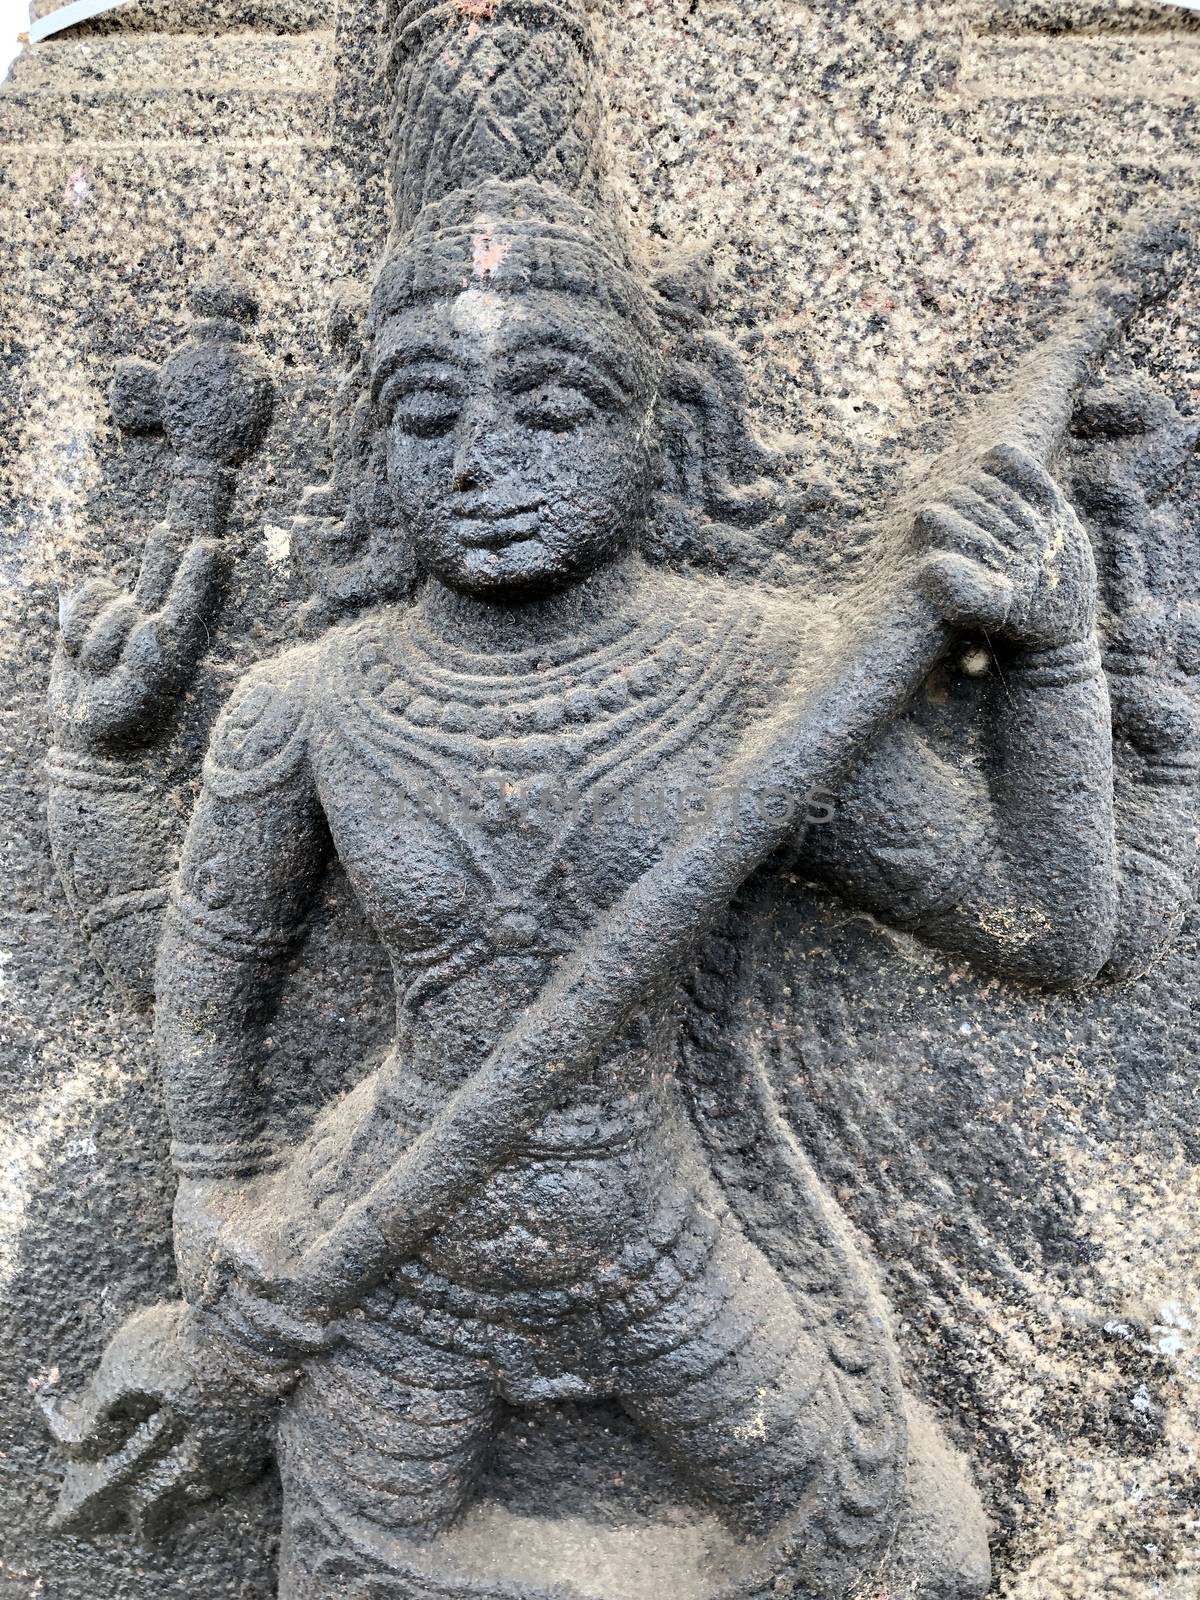 Sculpture of Shiva holding a trishula. Bas relief sculpture carved in the stone wall of Shiva temple in Tamil nadu by prabhakaran851